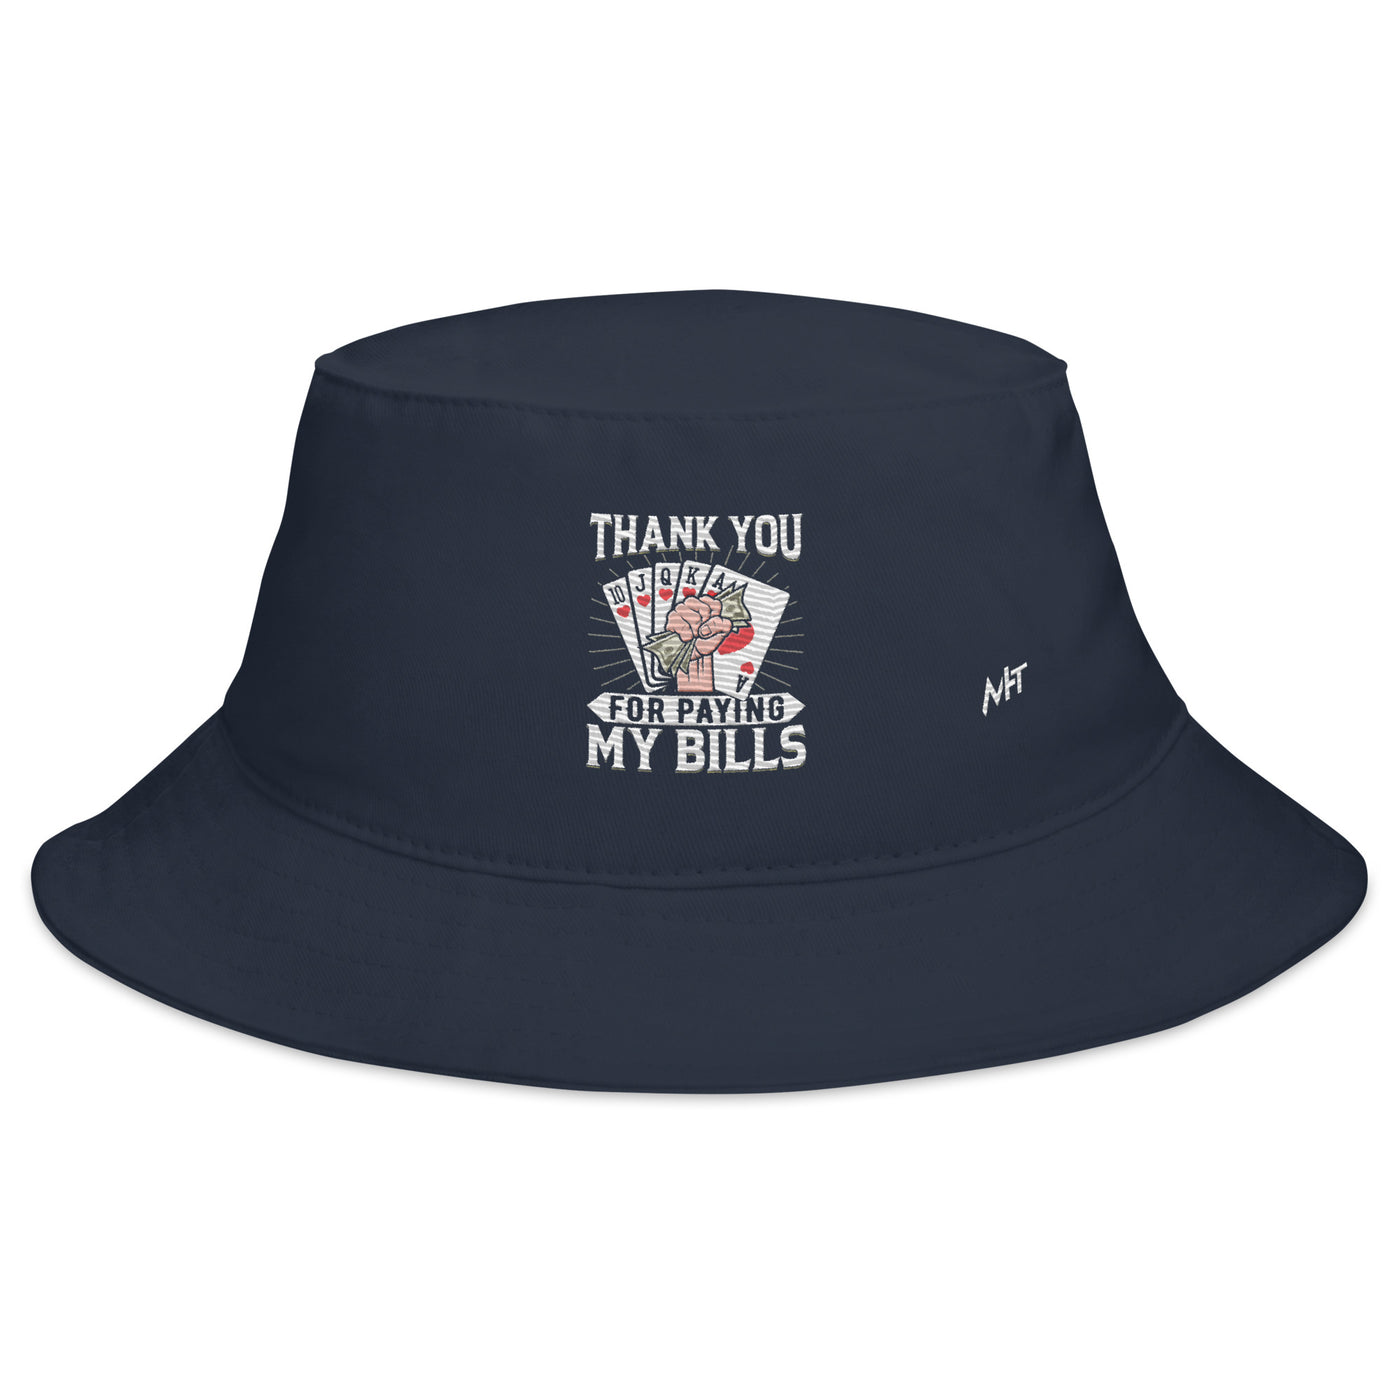 Thank you for Paying my bills - Bucket Hat